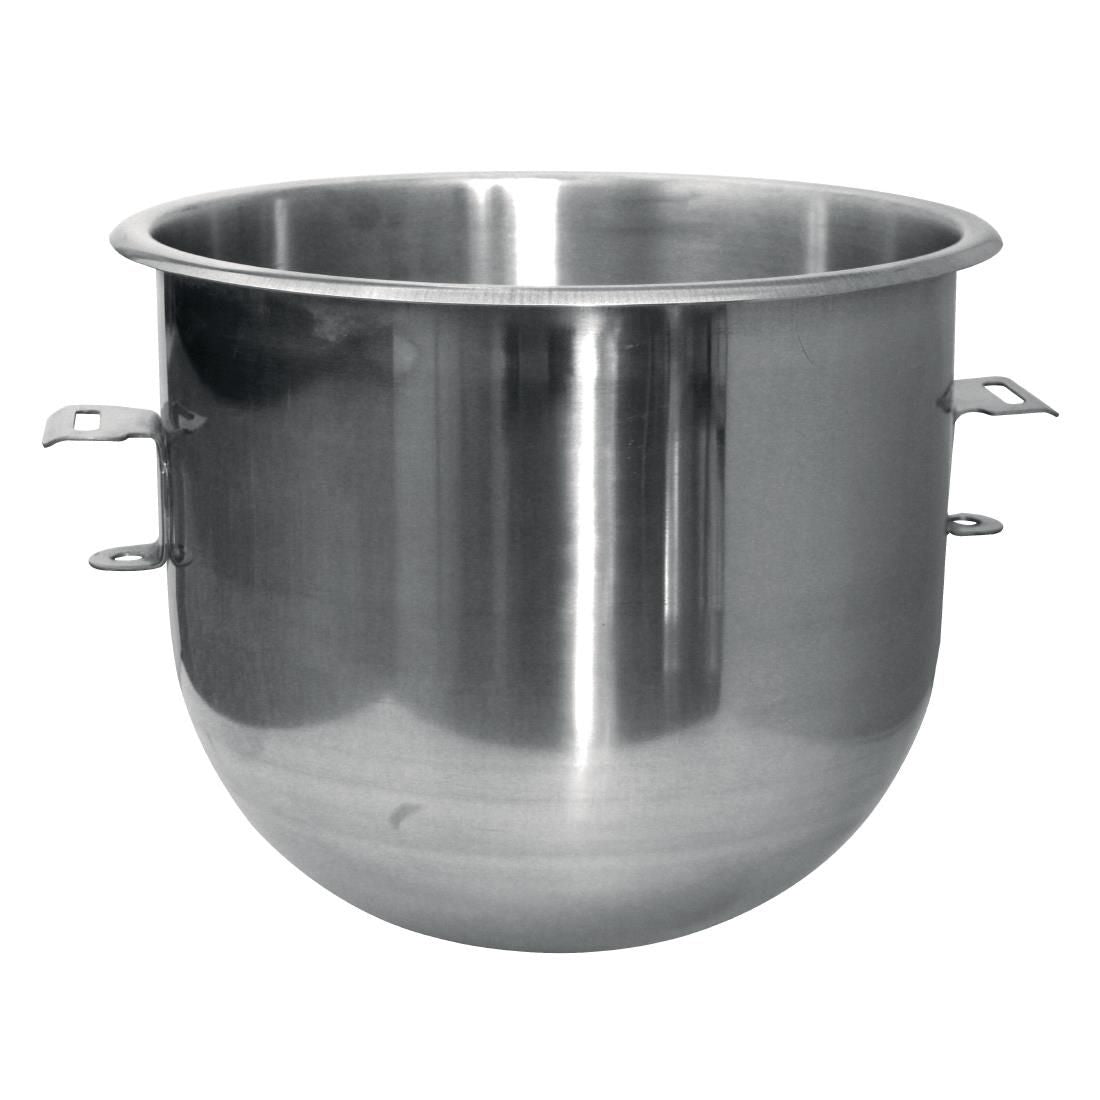 AF524 Buffalo Bowl Assembly JD Catering Equipment Solutions Ltd